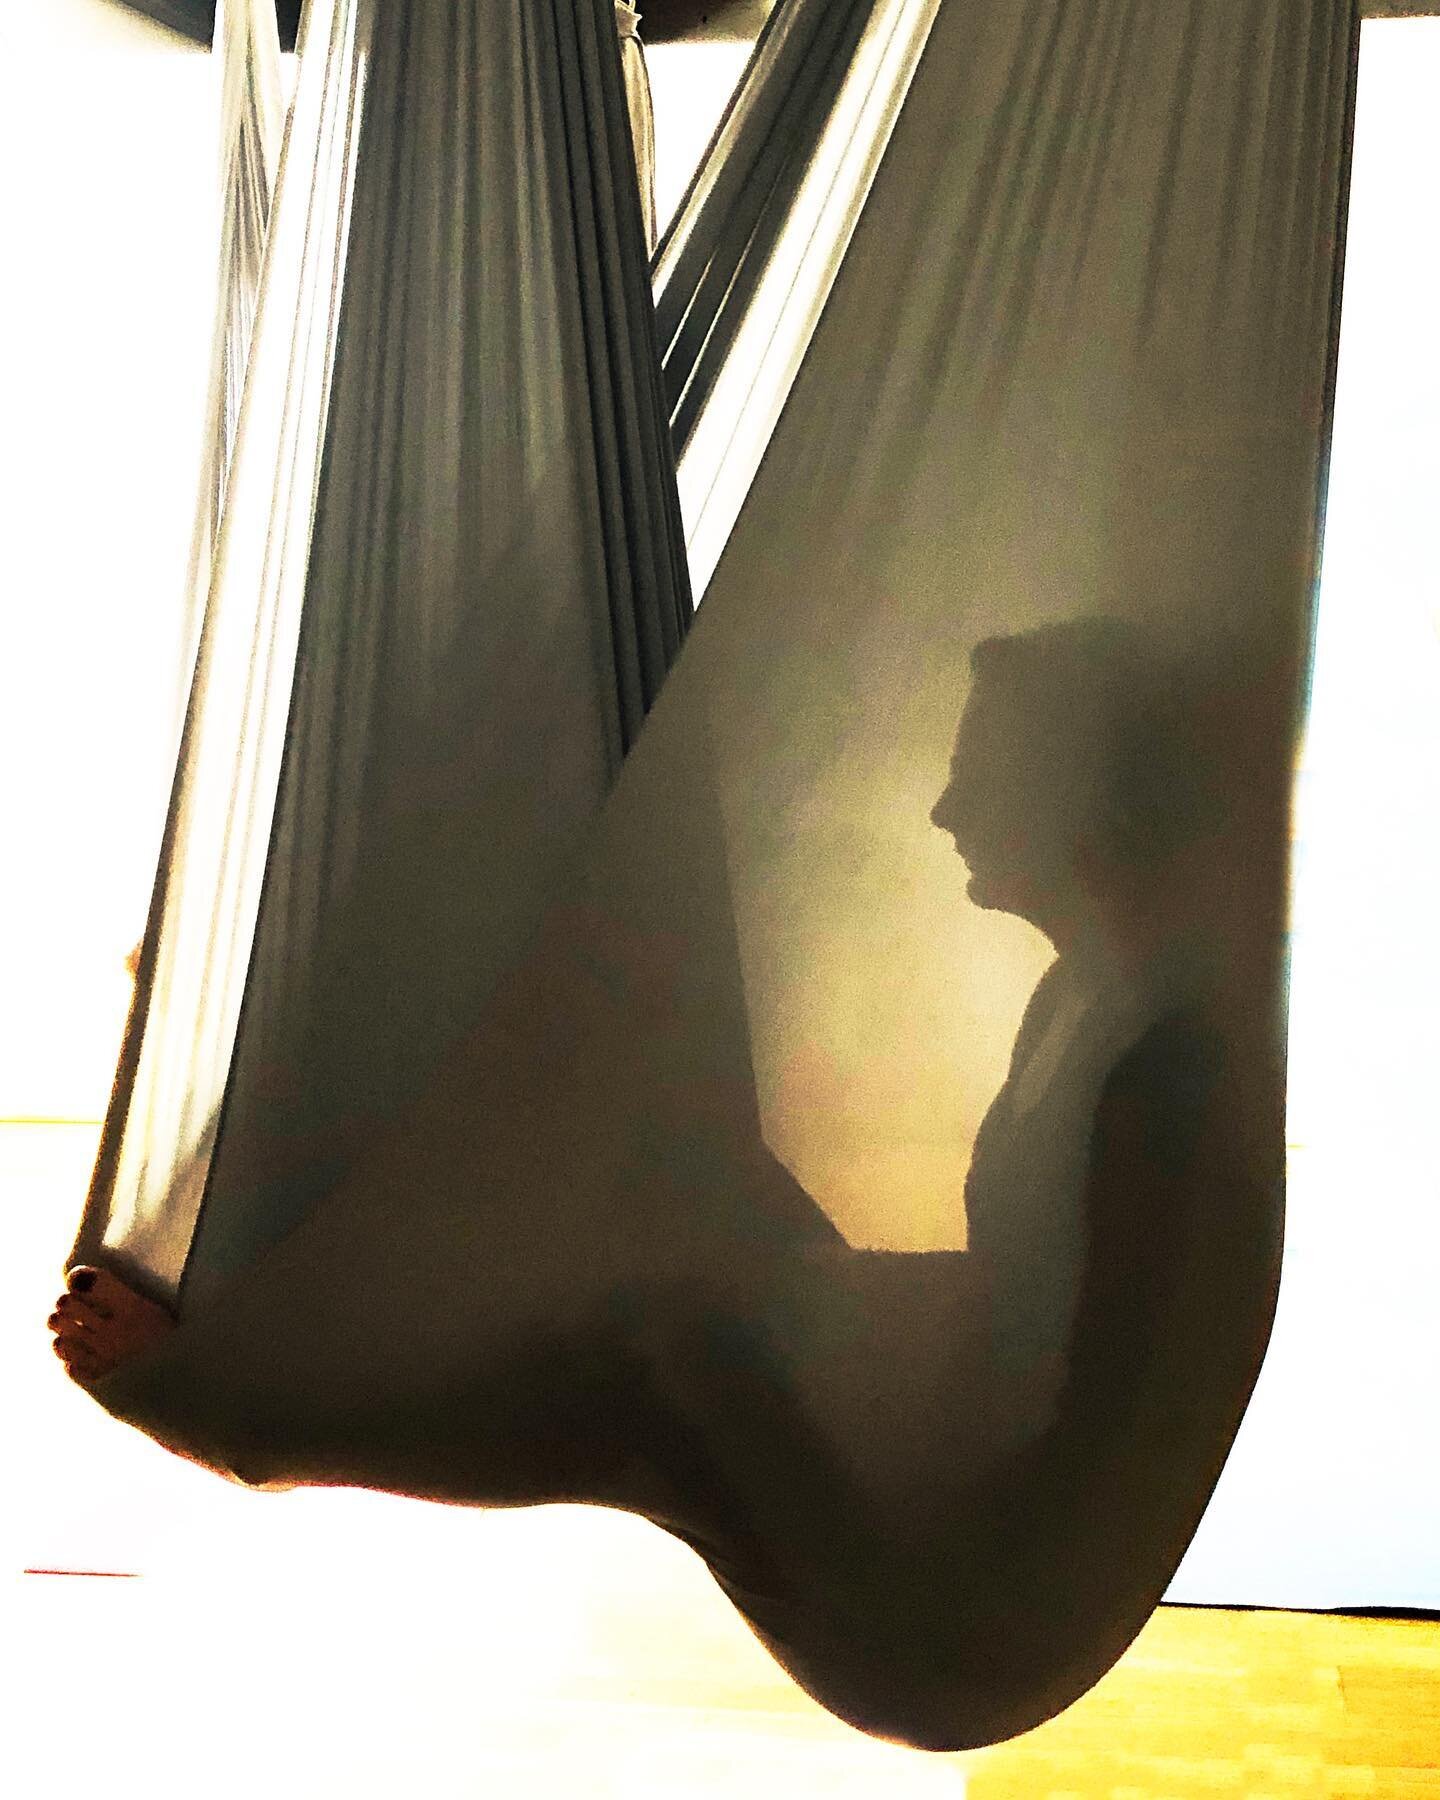 This is Nicola.❤️ Nicola came to her first class last week. ❤️ Nicola has booked ten more classes! ❤️ 
All of our classes begin with a seated relaxation to slow down the breath and quieten the mind. Floating in your own little cocoon and surrendering